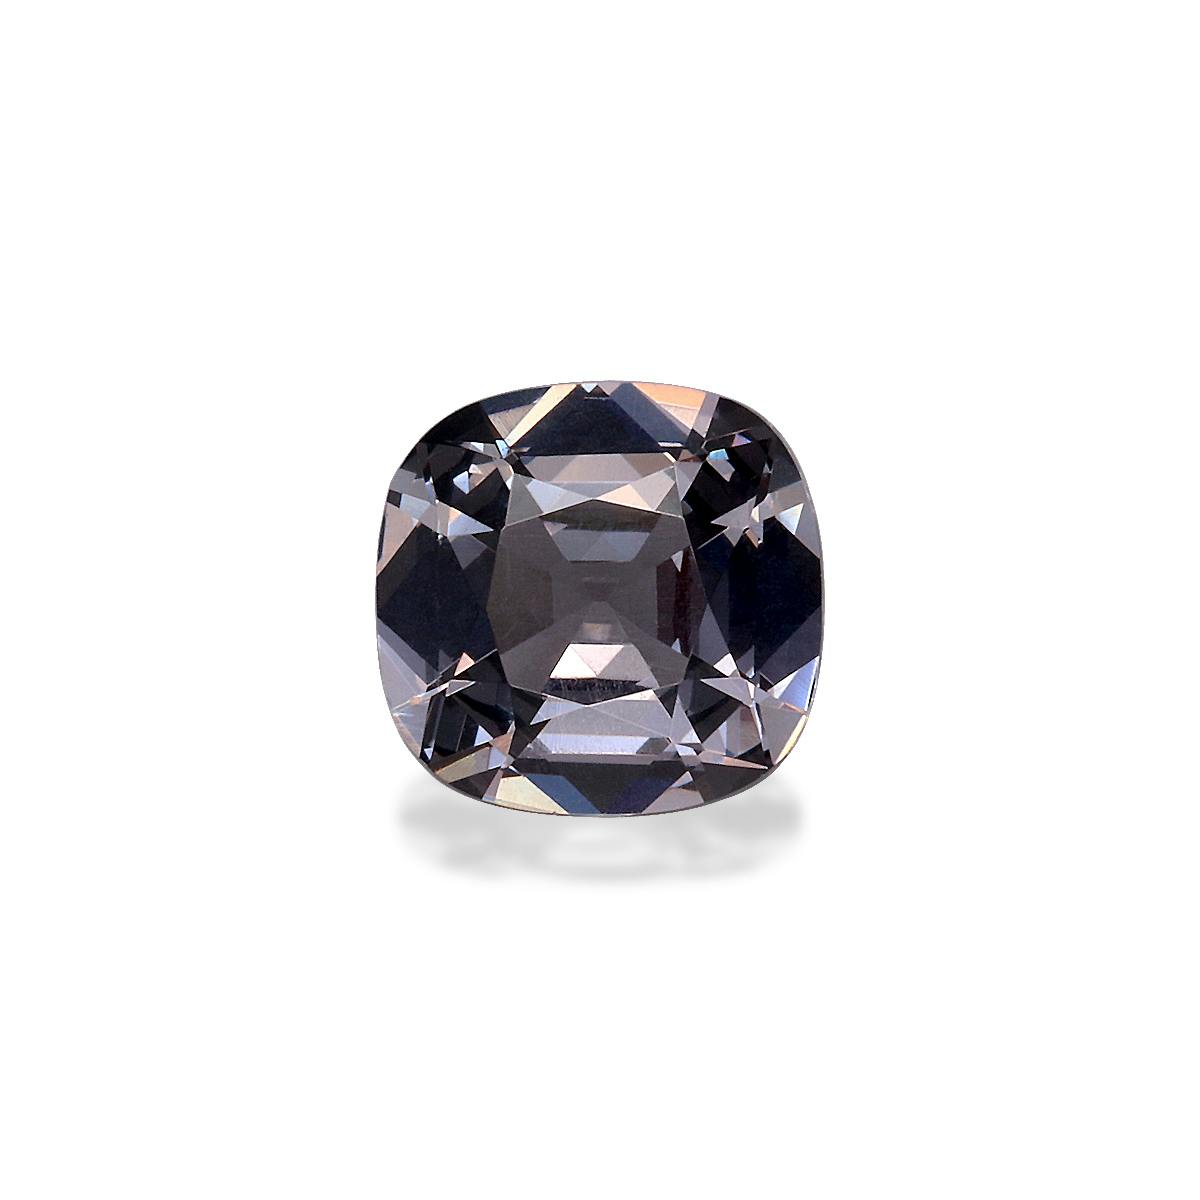 Grey Spinel 1.30ct (SP0225)